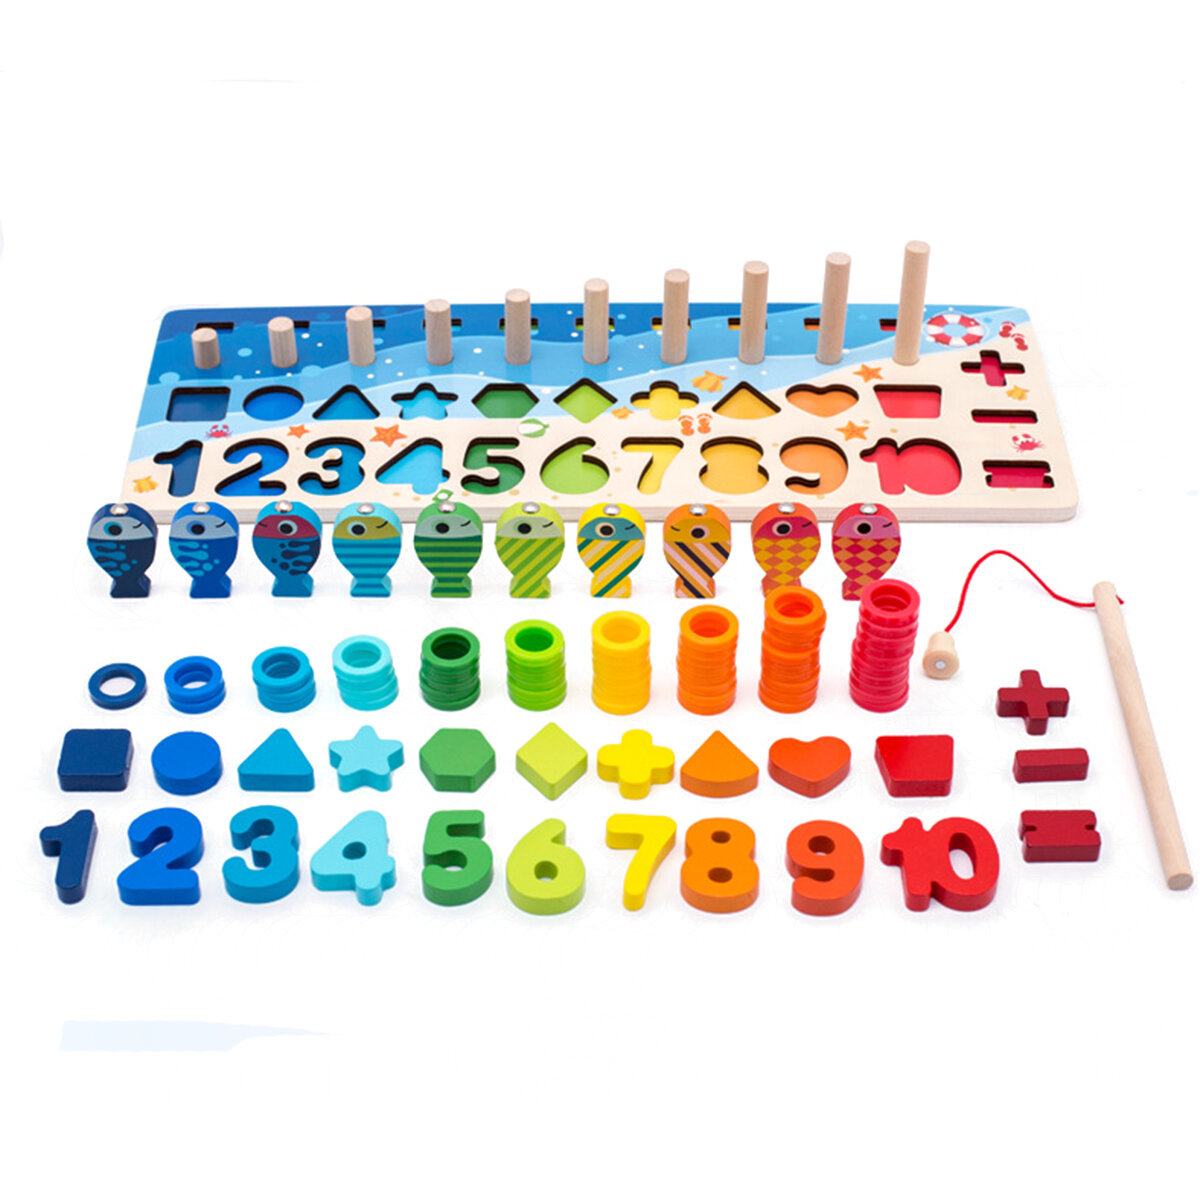 Math Fishing Board Preschool Wooden Toys Count Numbers Matching Digital Shape Cognition Early Educational Toys For Child